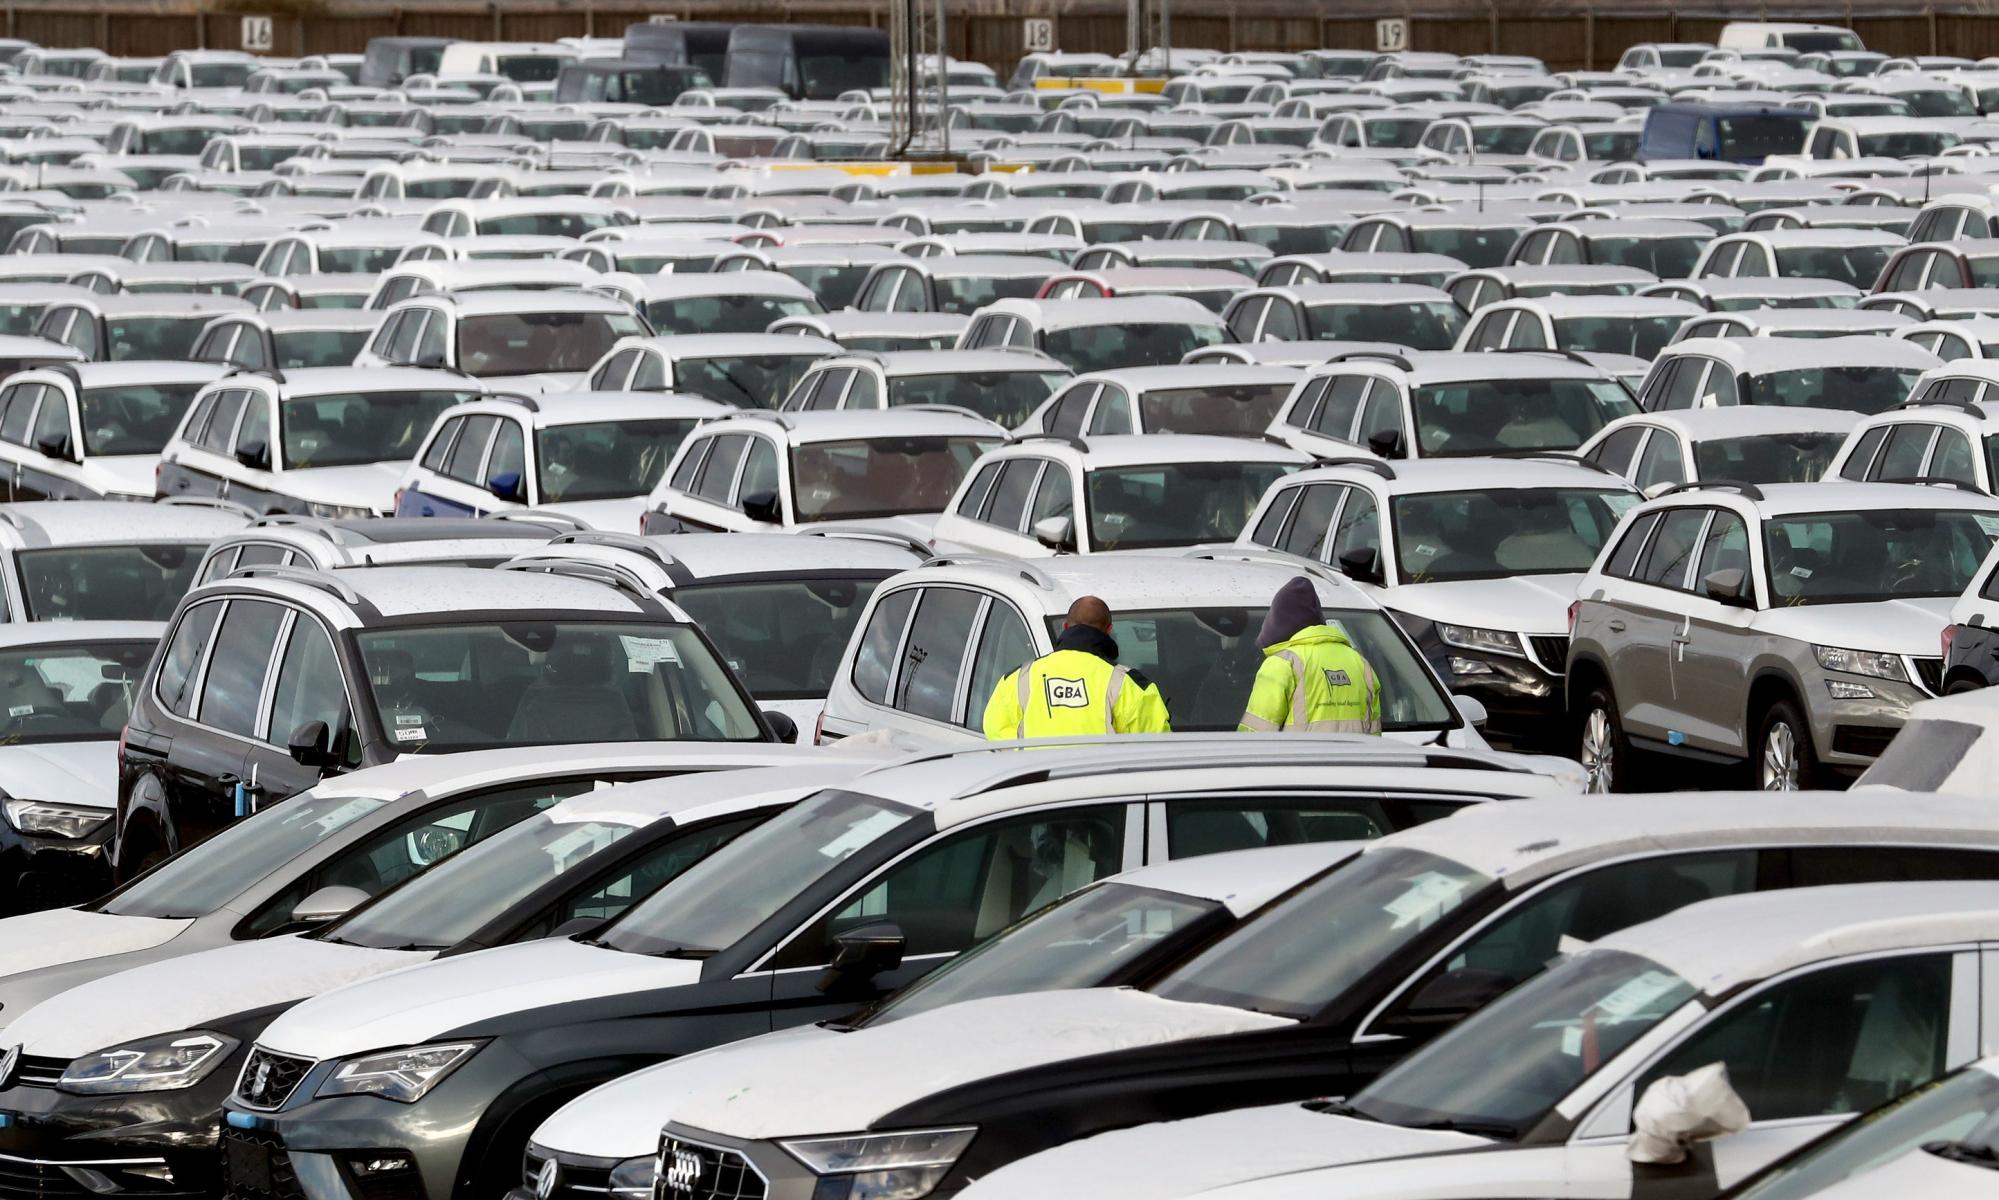 Polluting vehicles could be pulled from UK sale, say carmakers